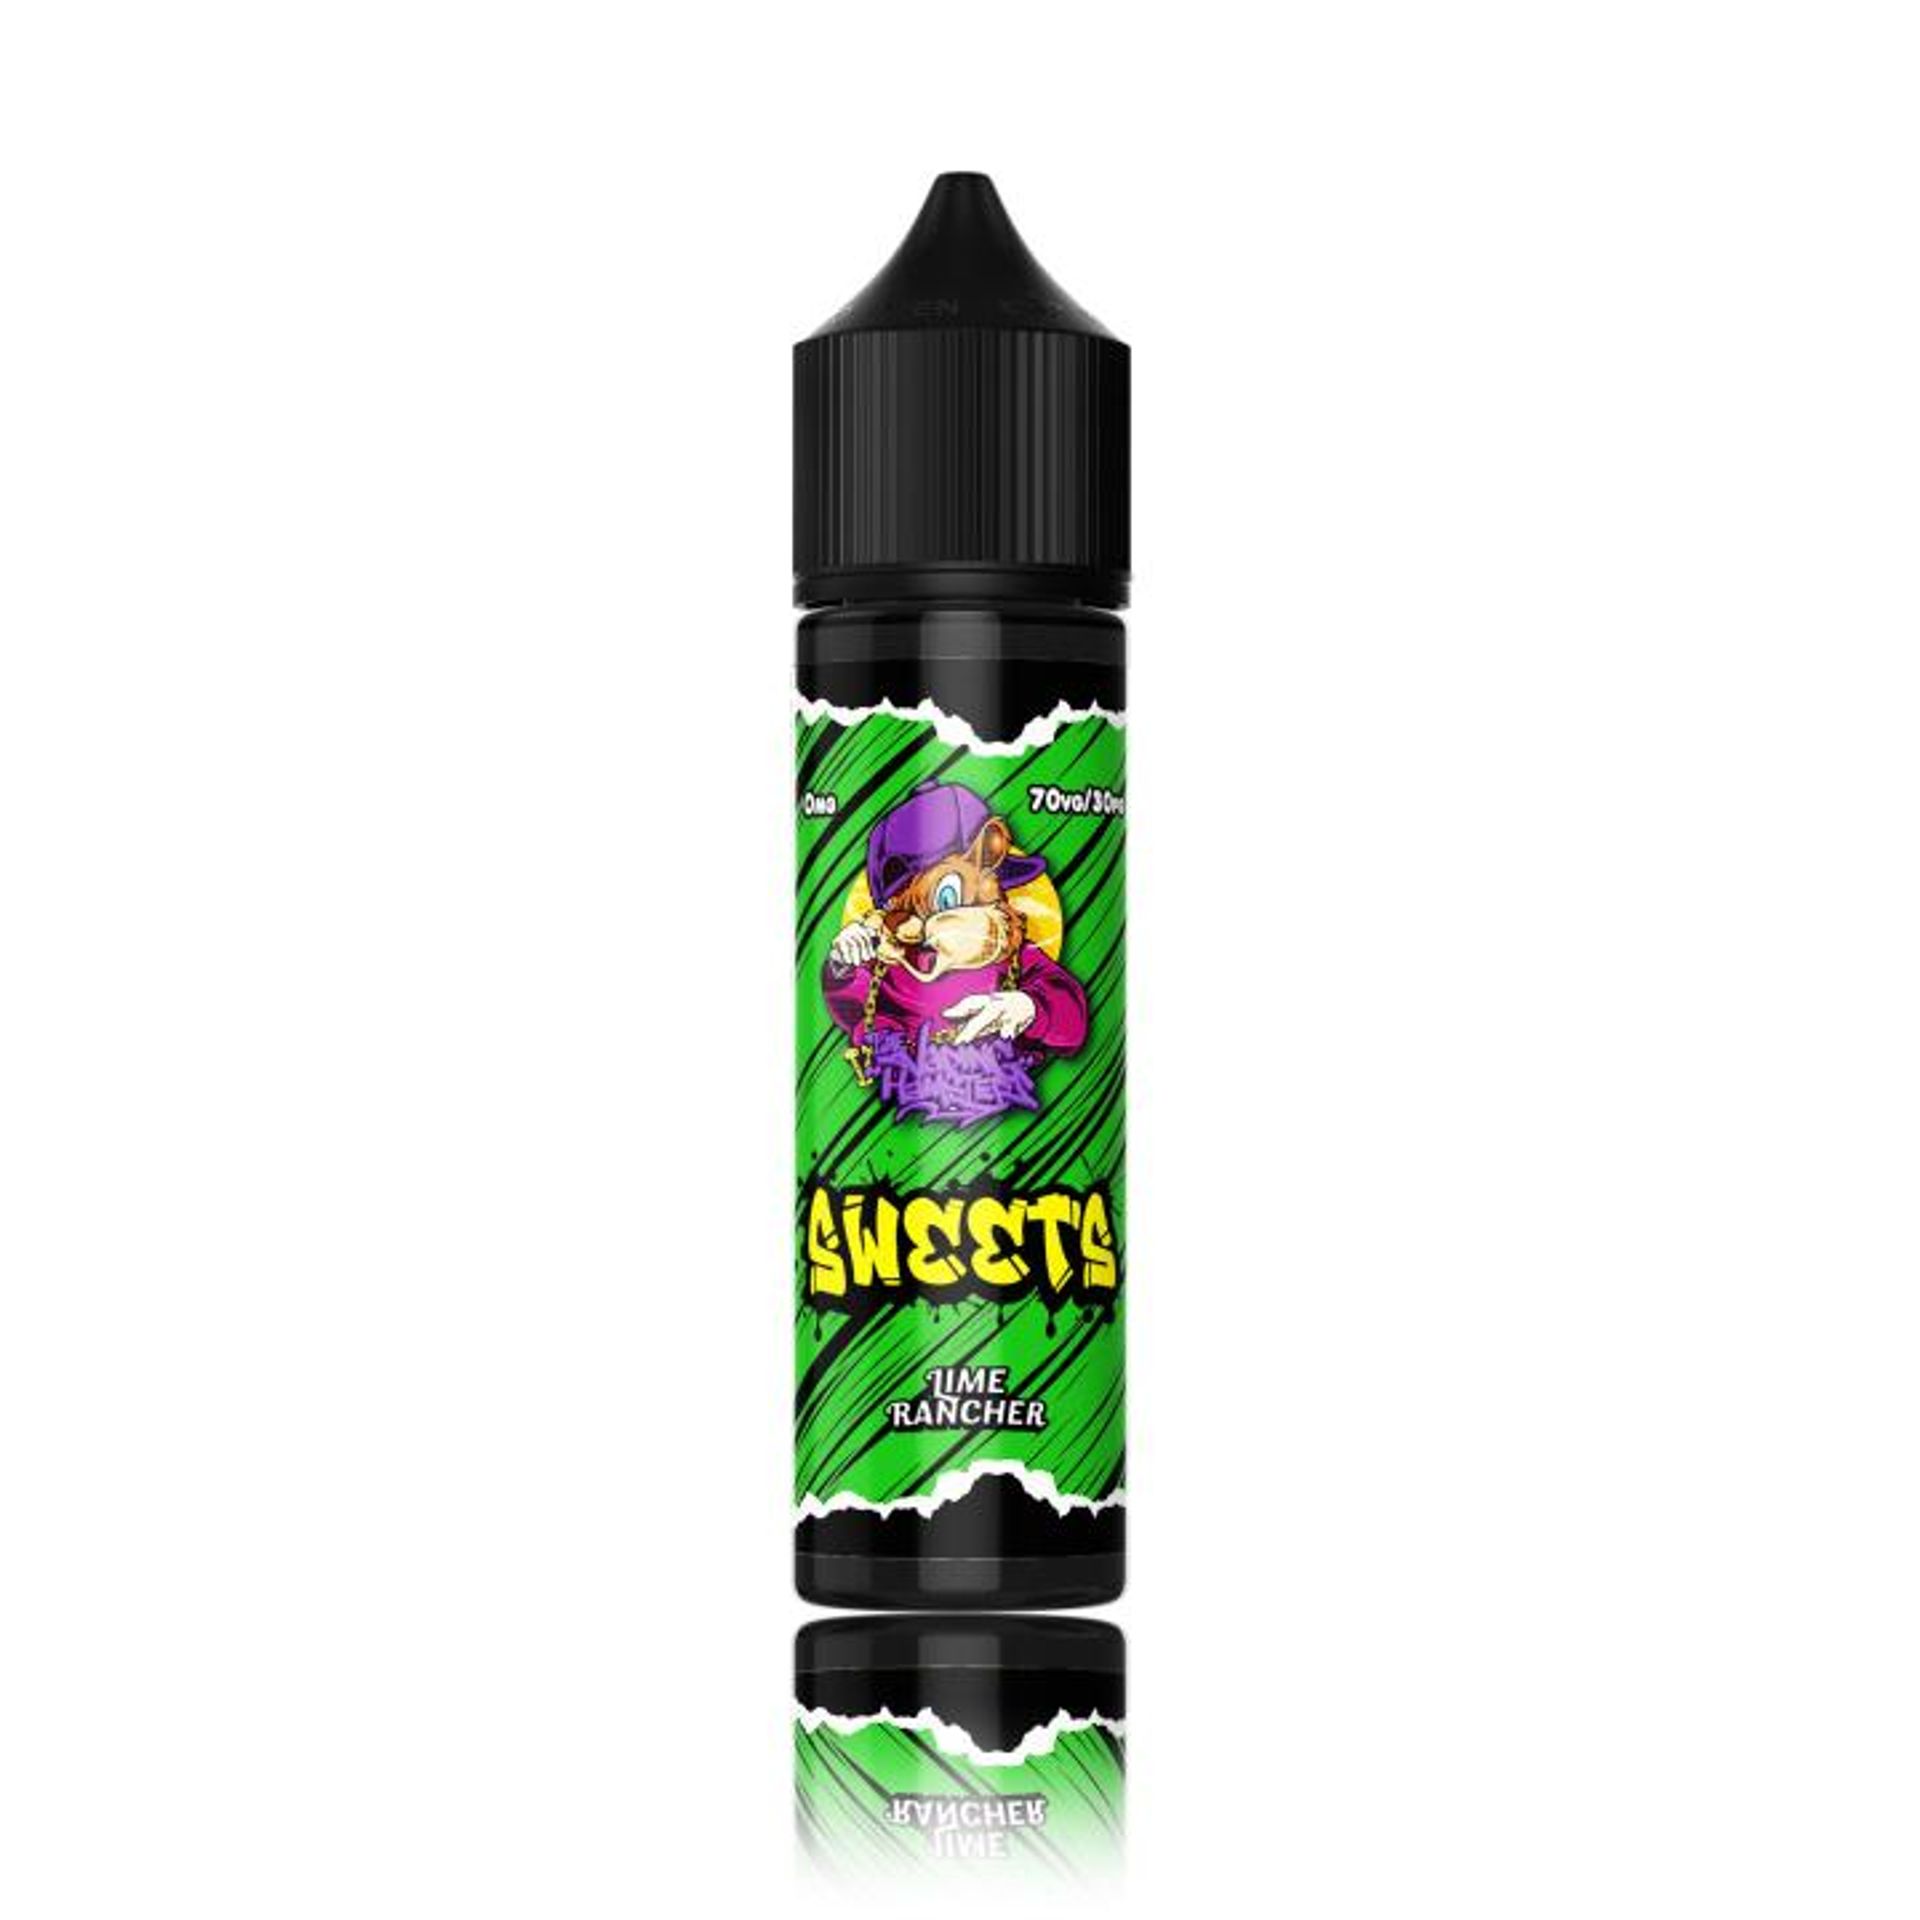 Image of Lime Rancher by The Vaping Hamster